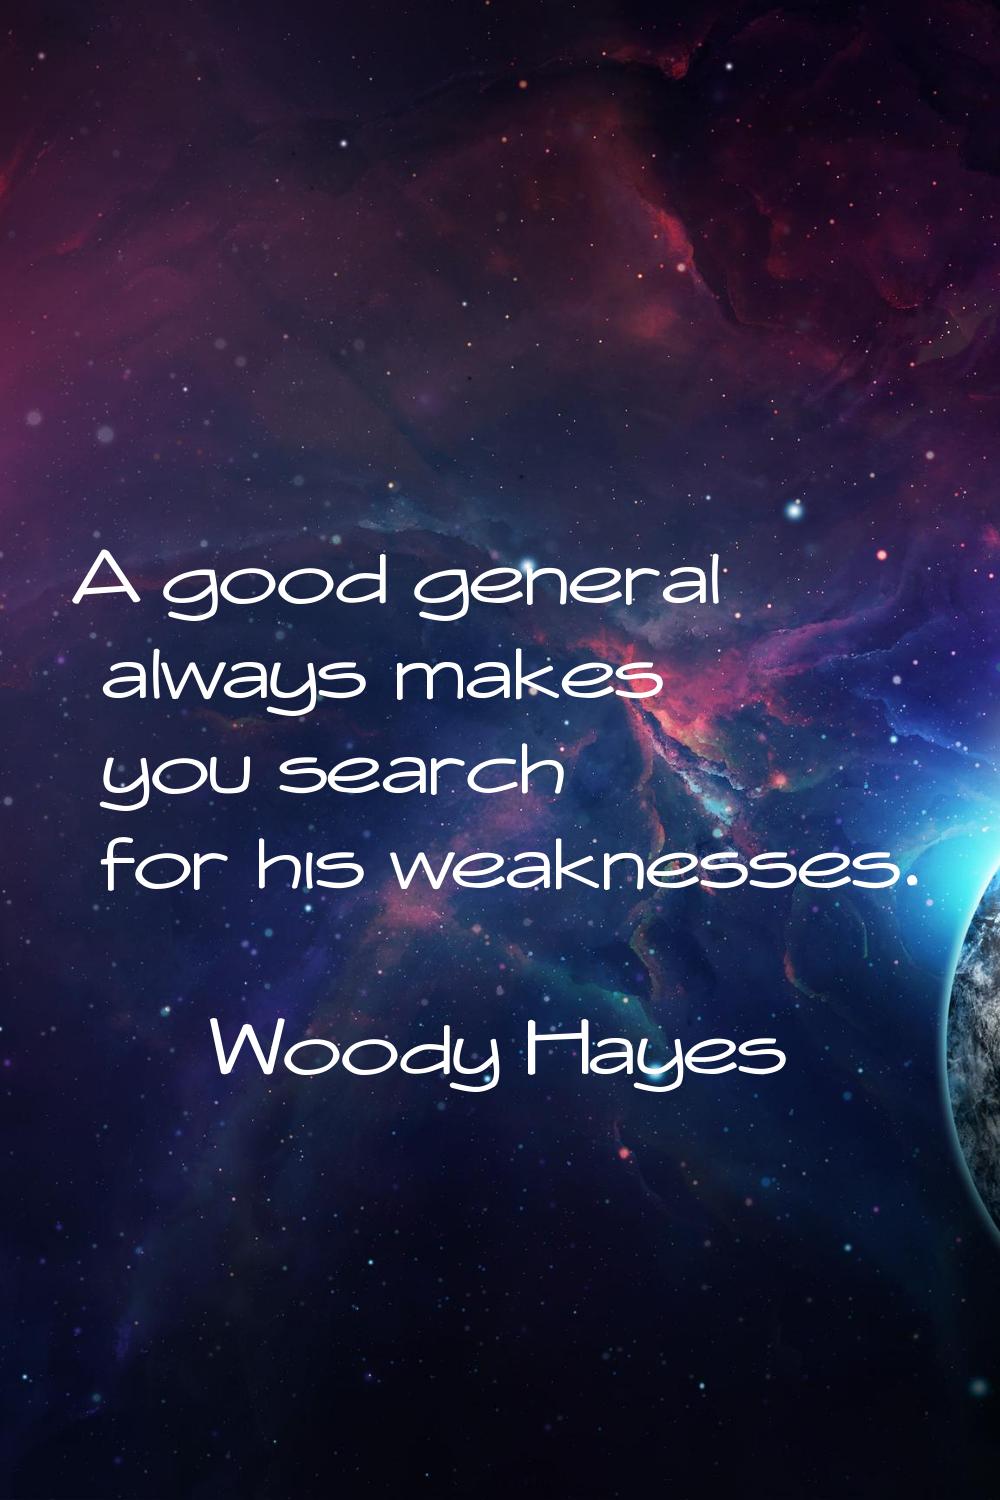 A good general always makes you search for his weaknesses.